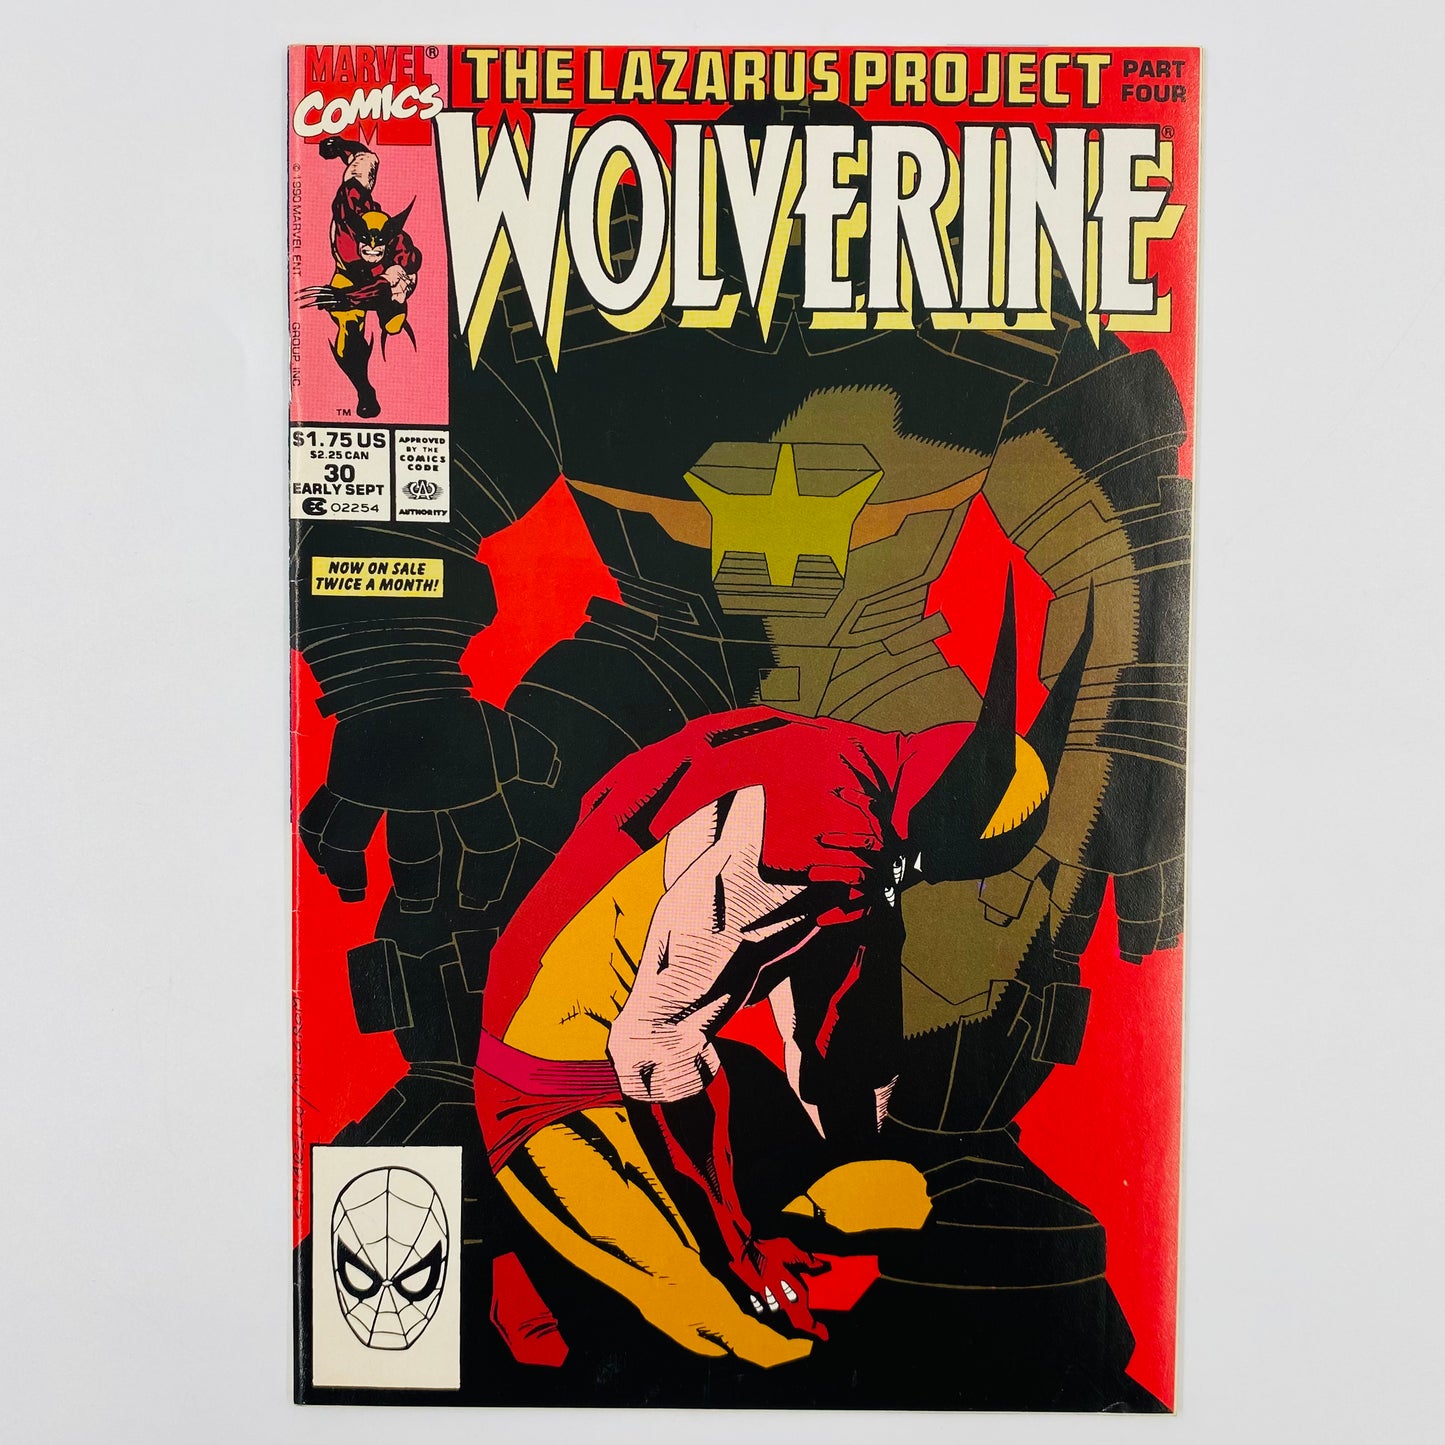 Wolverine #27-30 The Lazarus Project (1990) Marvel